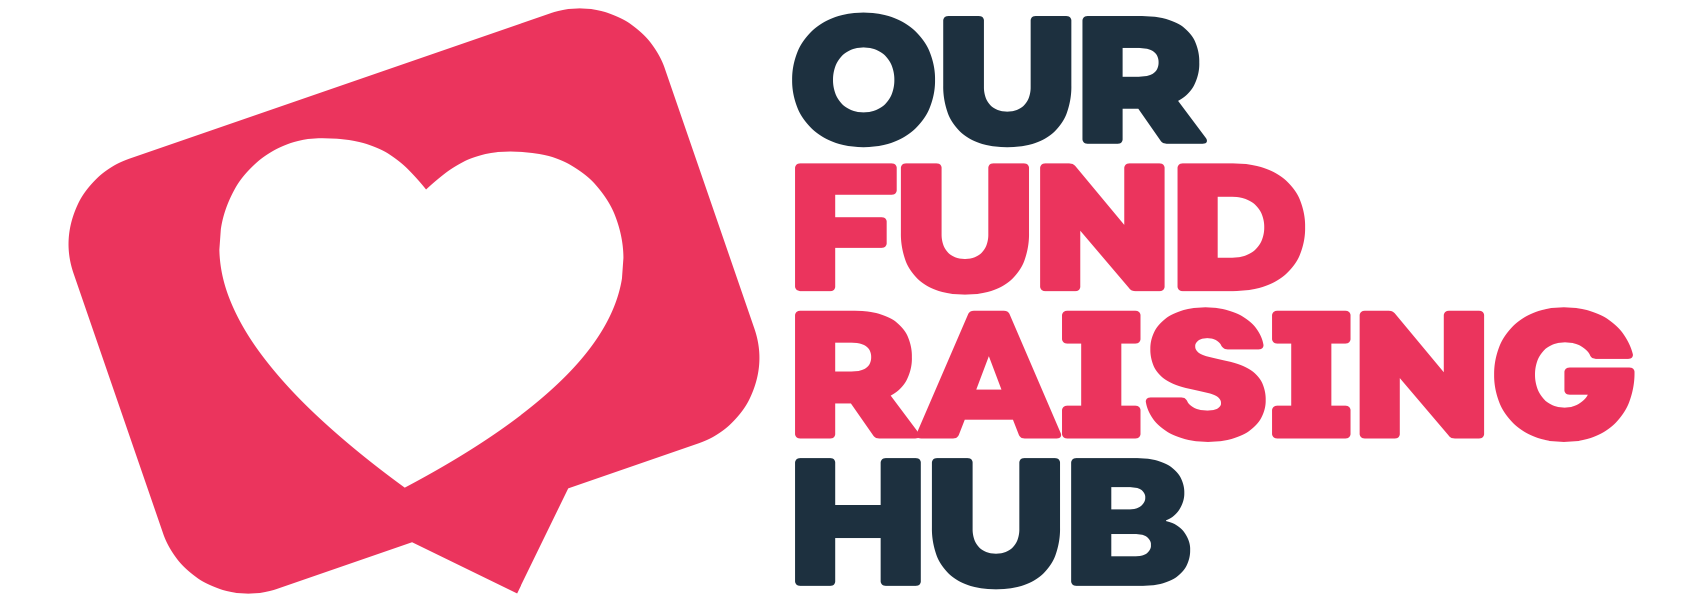 Our Fundraising Hub